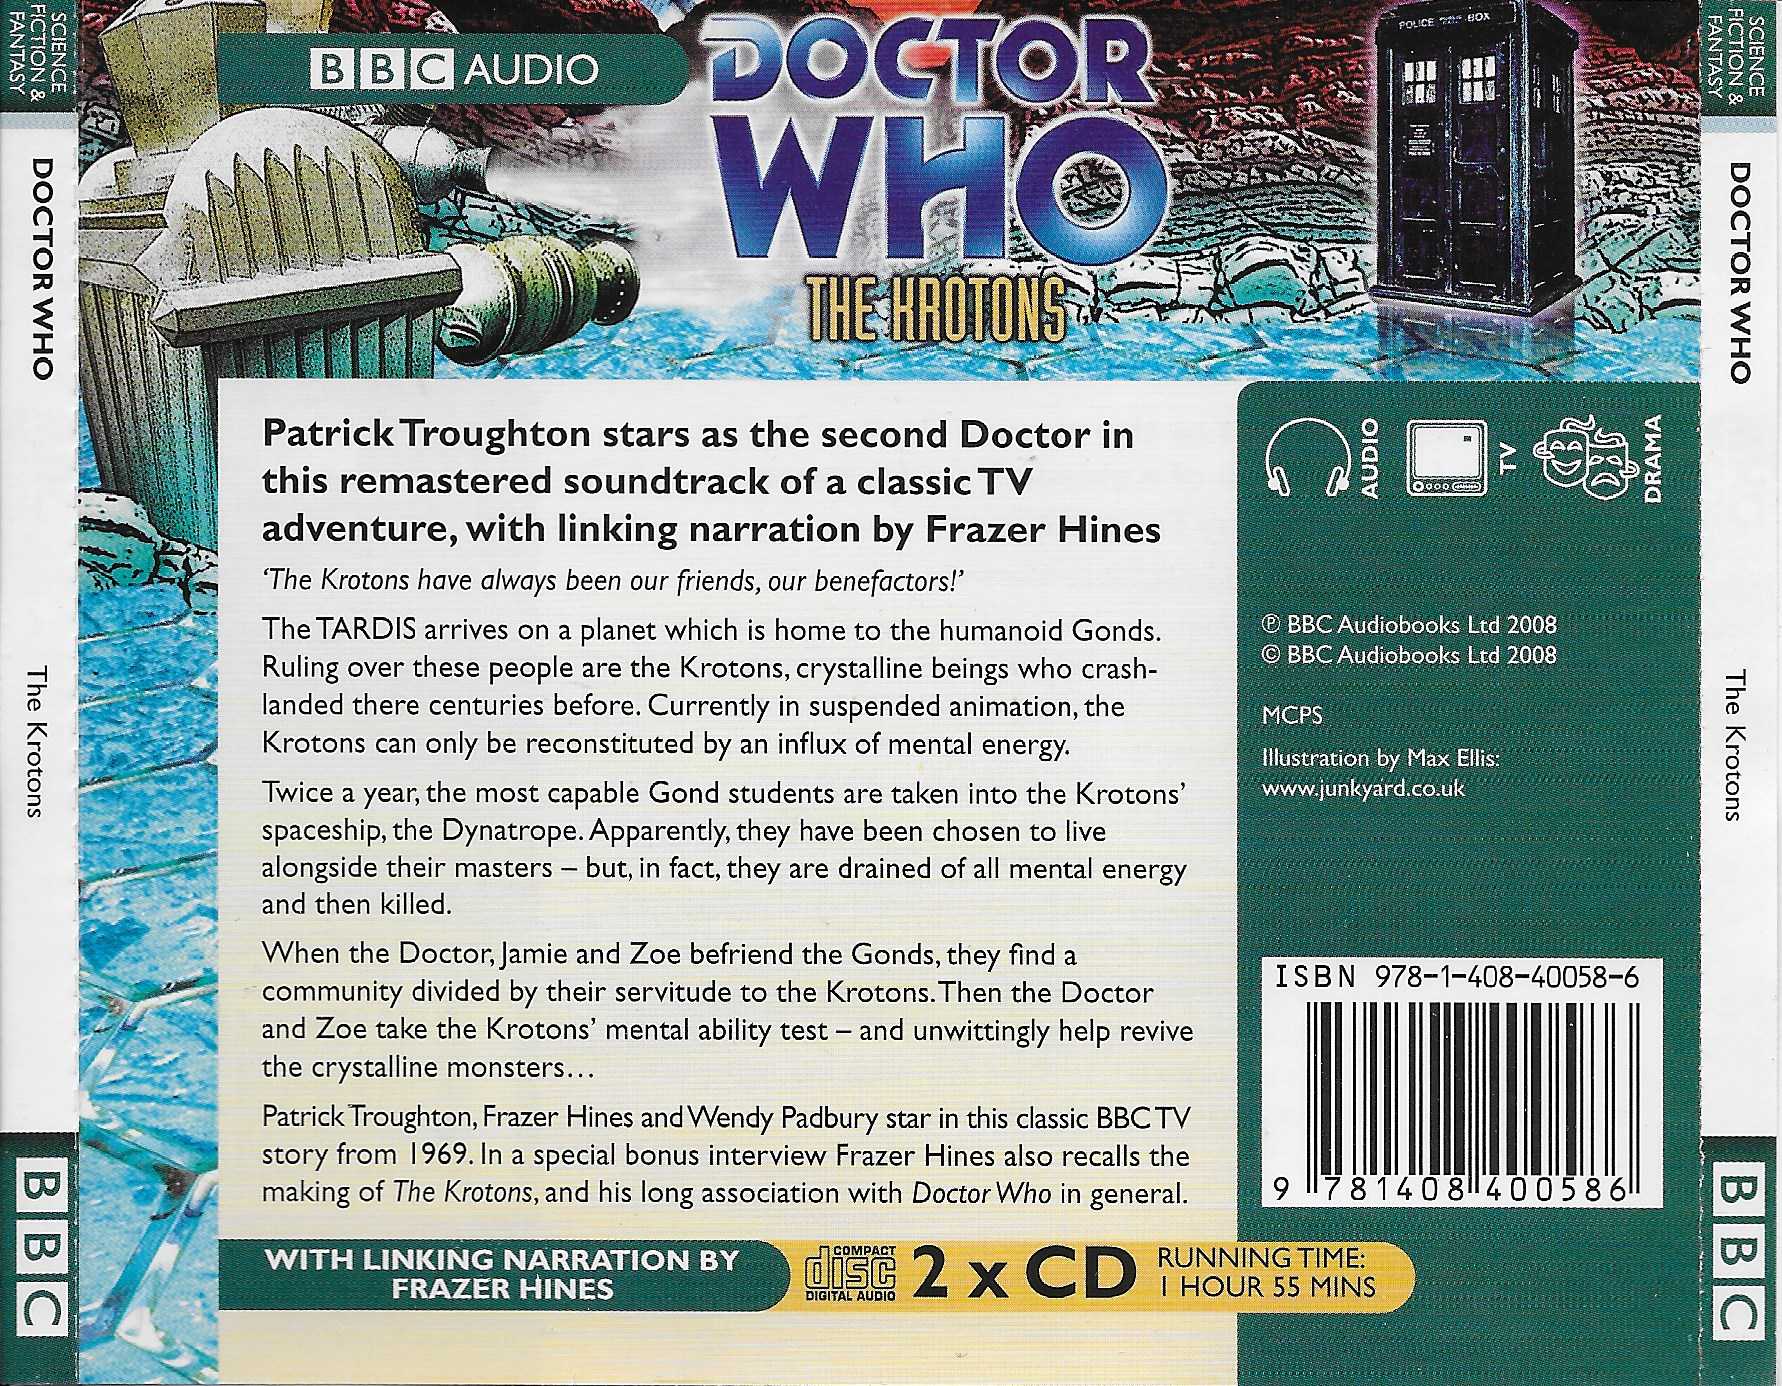 Picture of ISBN 978-1-408-40058-6 Doctor Who - The Krotons by artist Robert Holmes from the BBC records and Tapes library